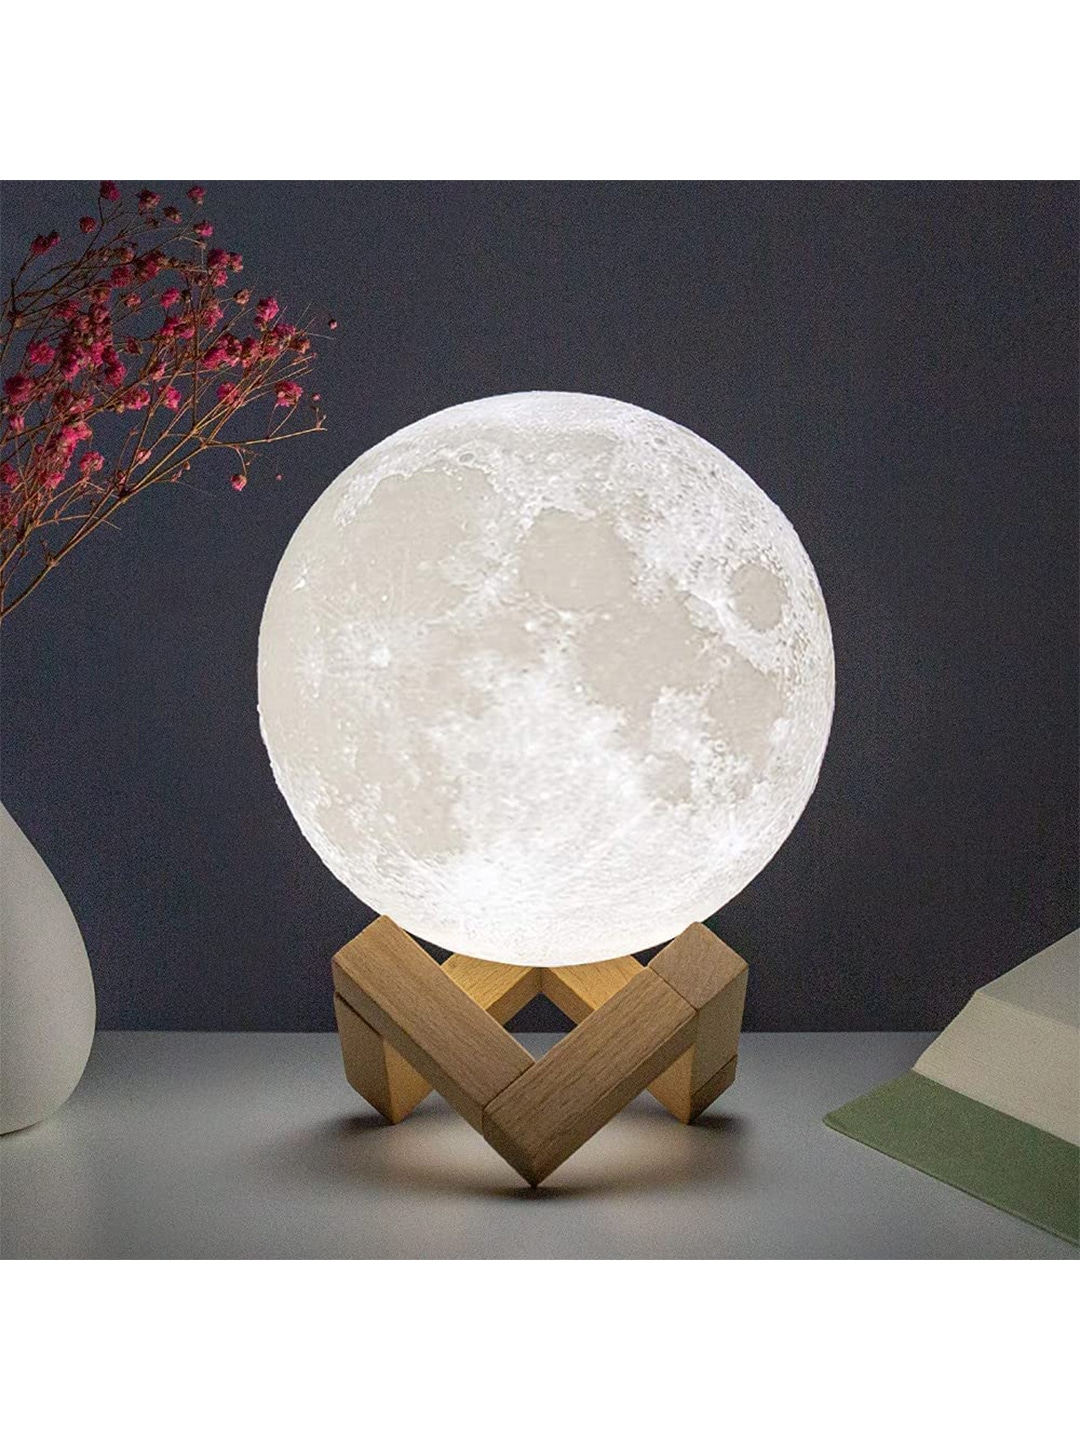 XERGY White & Beige 3D Rechargeable Moon Lamp with Touch Control- 10cm Price in India